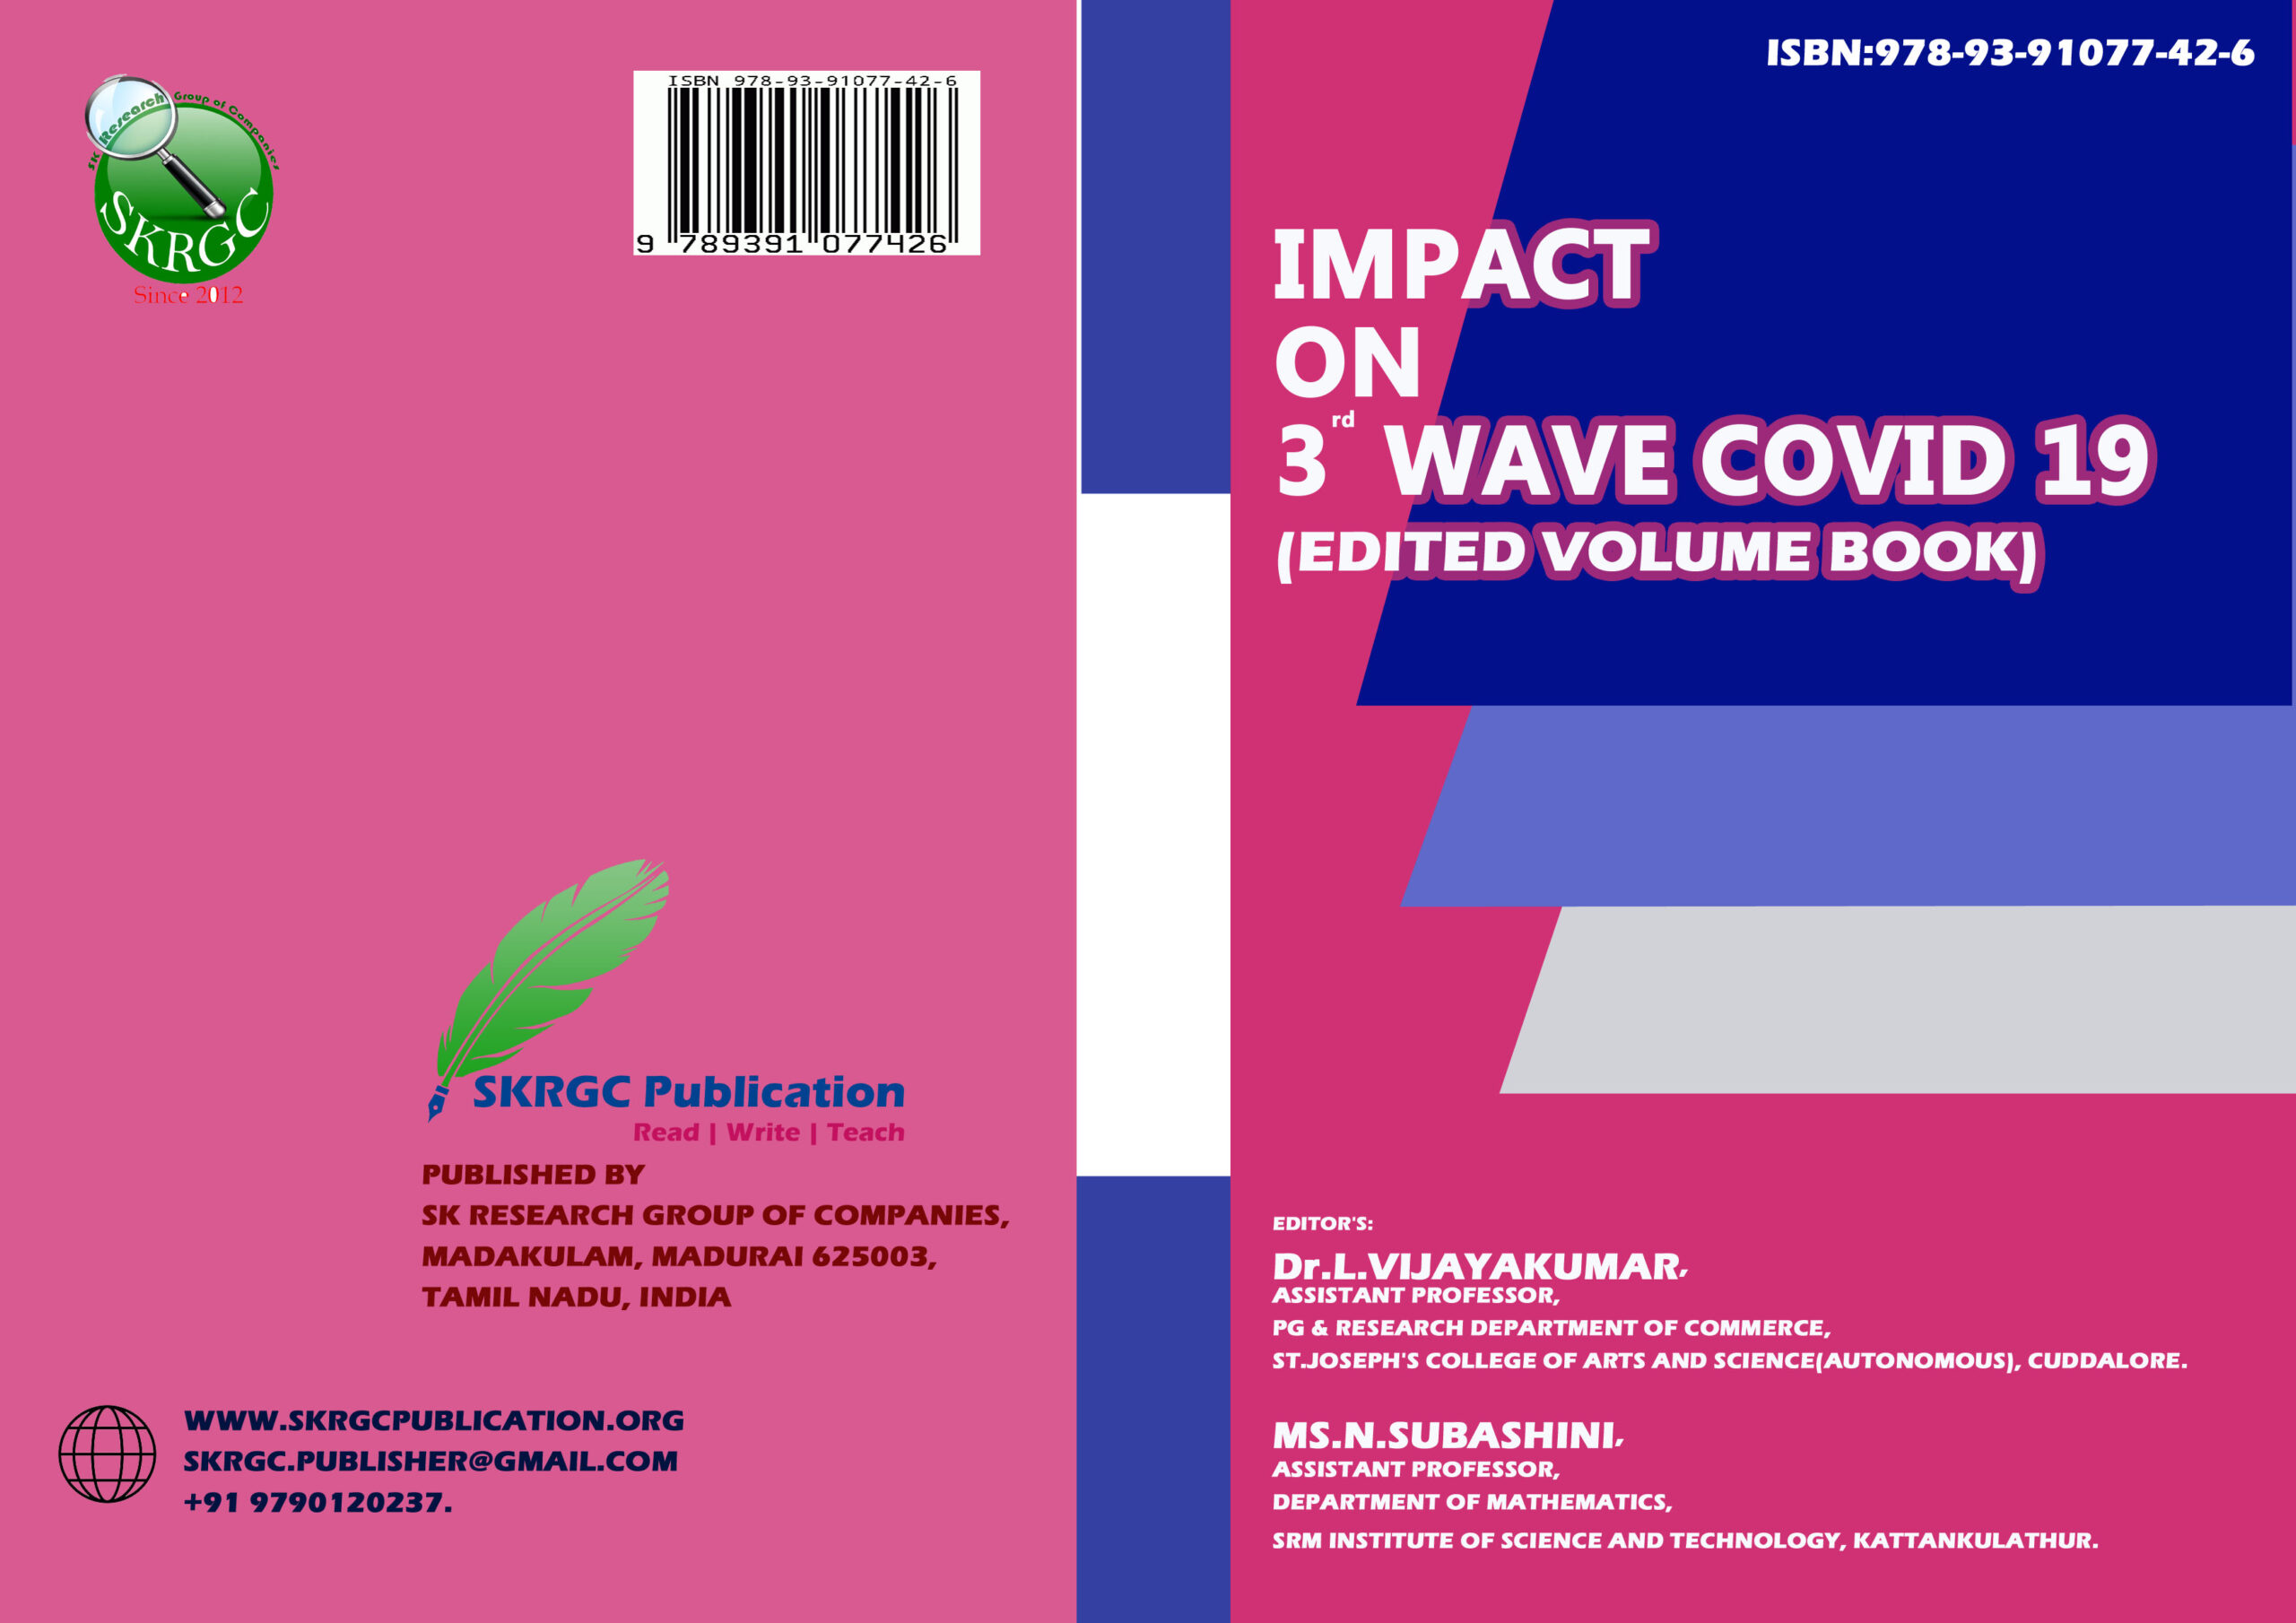 Impact on 3rd Wave Covid 19